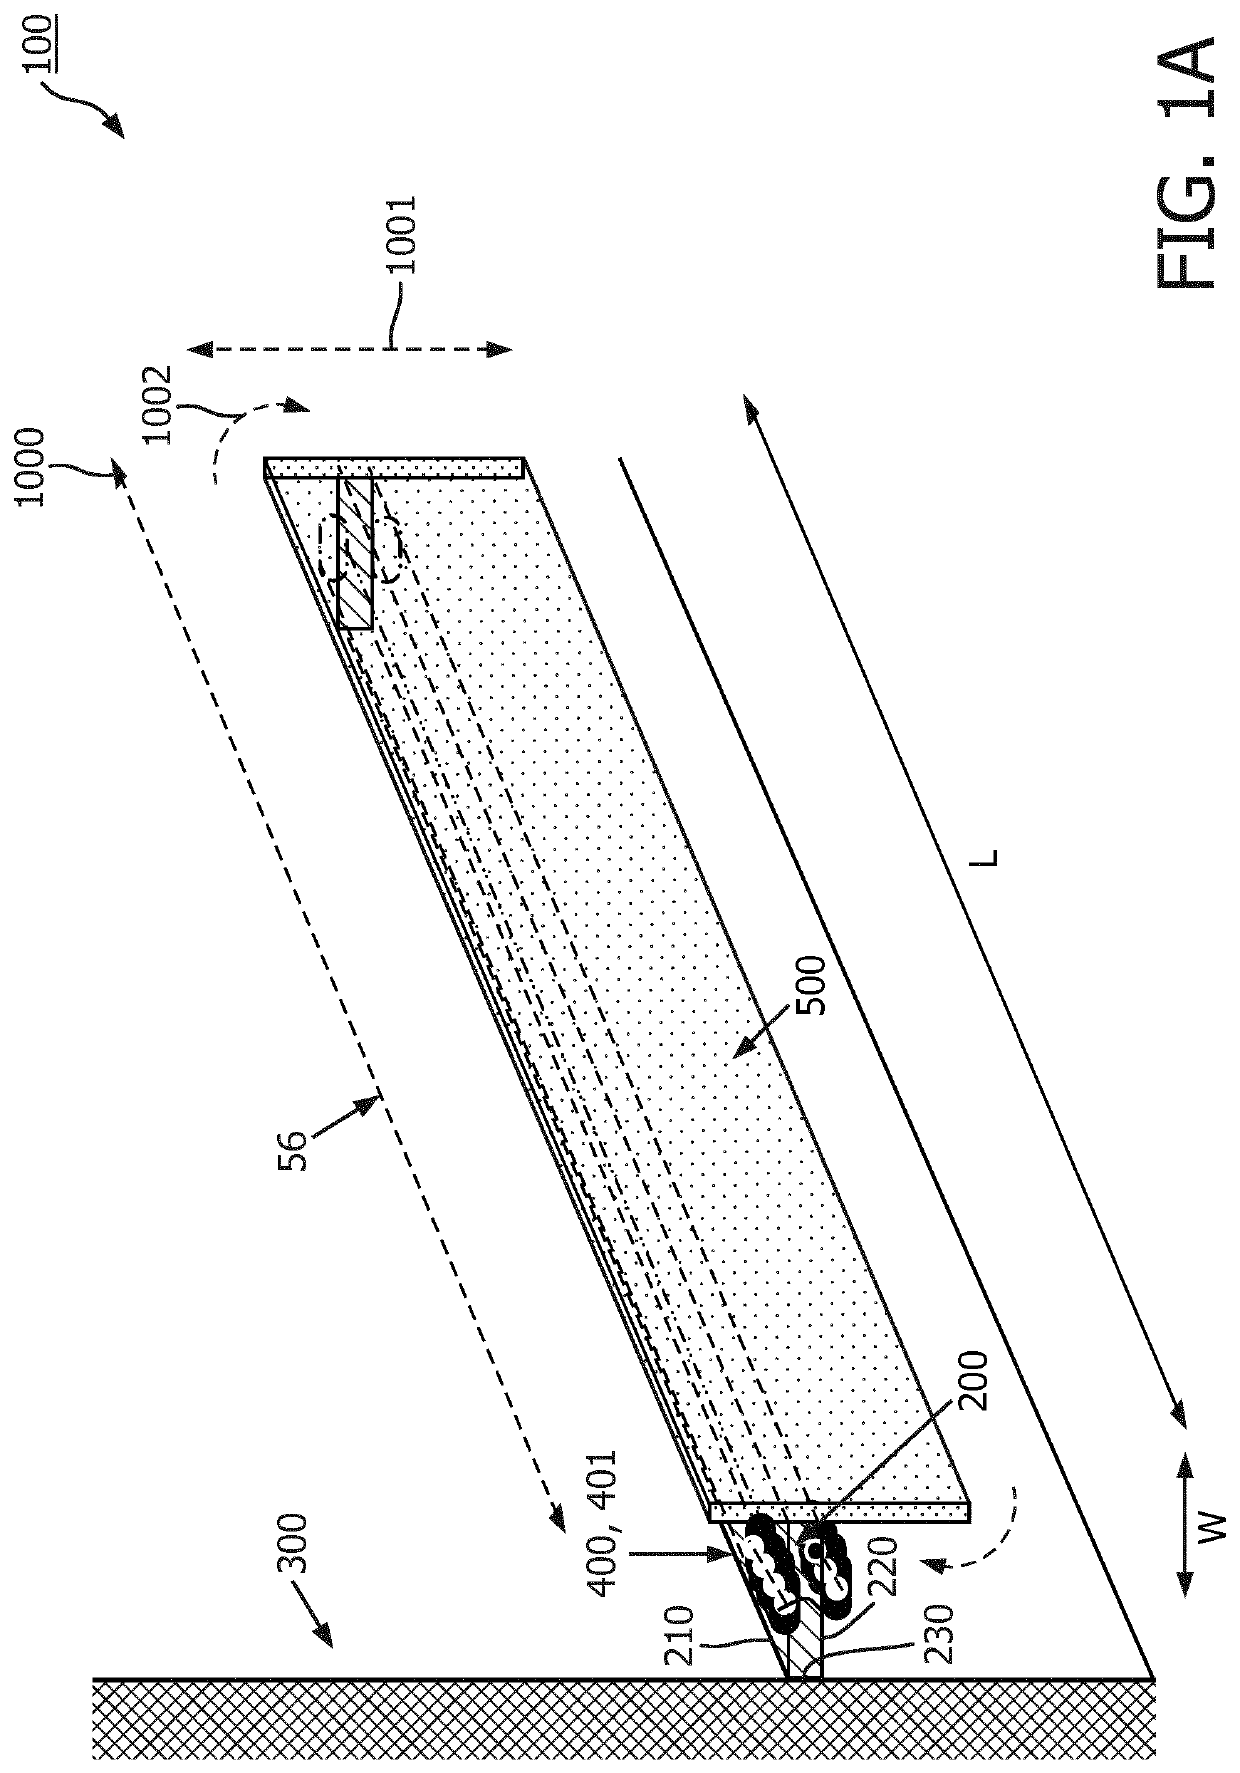 Lighting device including adjustable cover